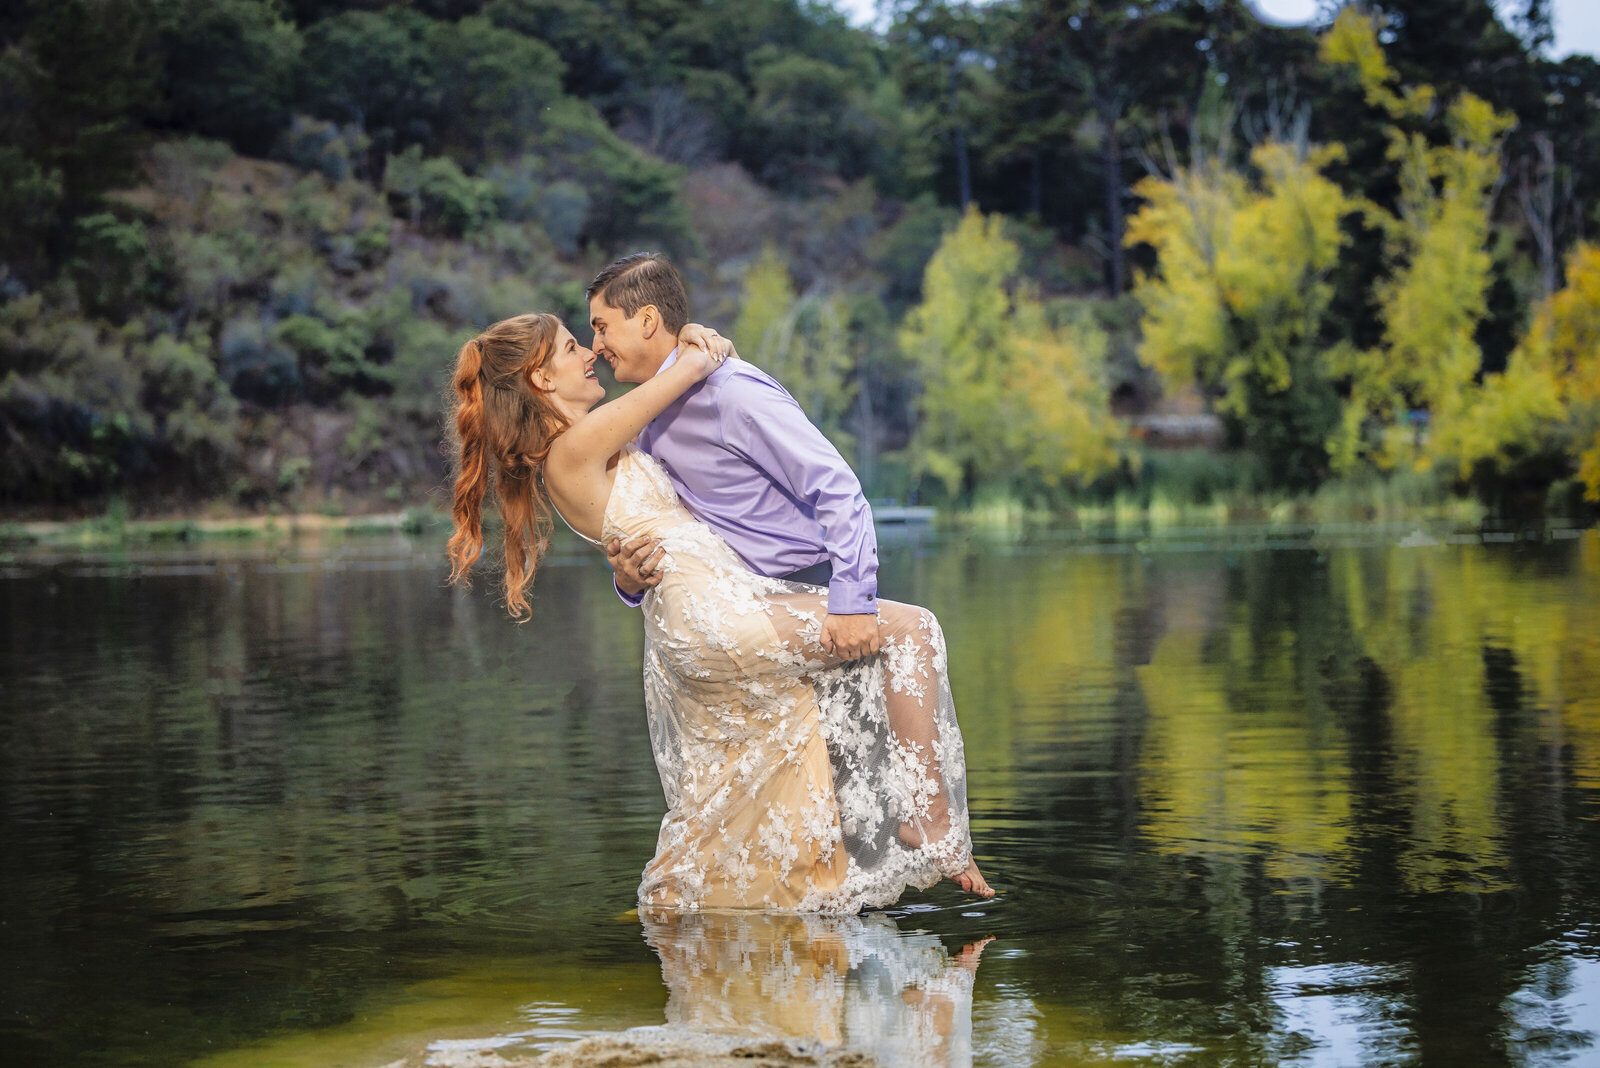 Engaged man dips his soon to be wife in the middle of the water with hills in the background while smiling at her. Photo by wedding photographer Sacramento Philippe Studio Pro.